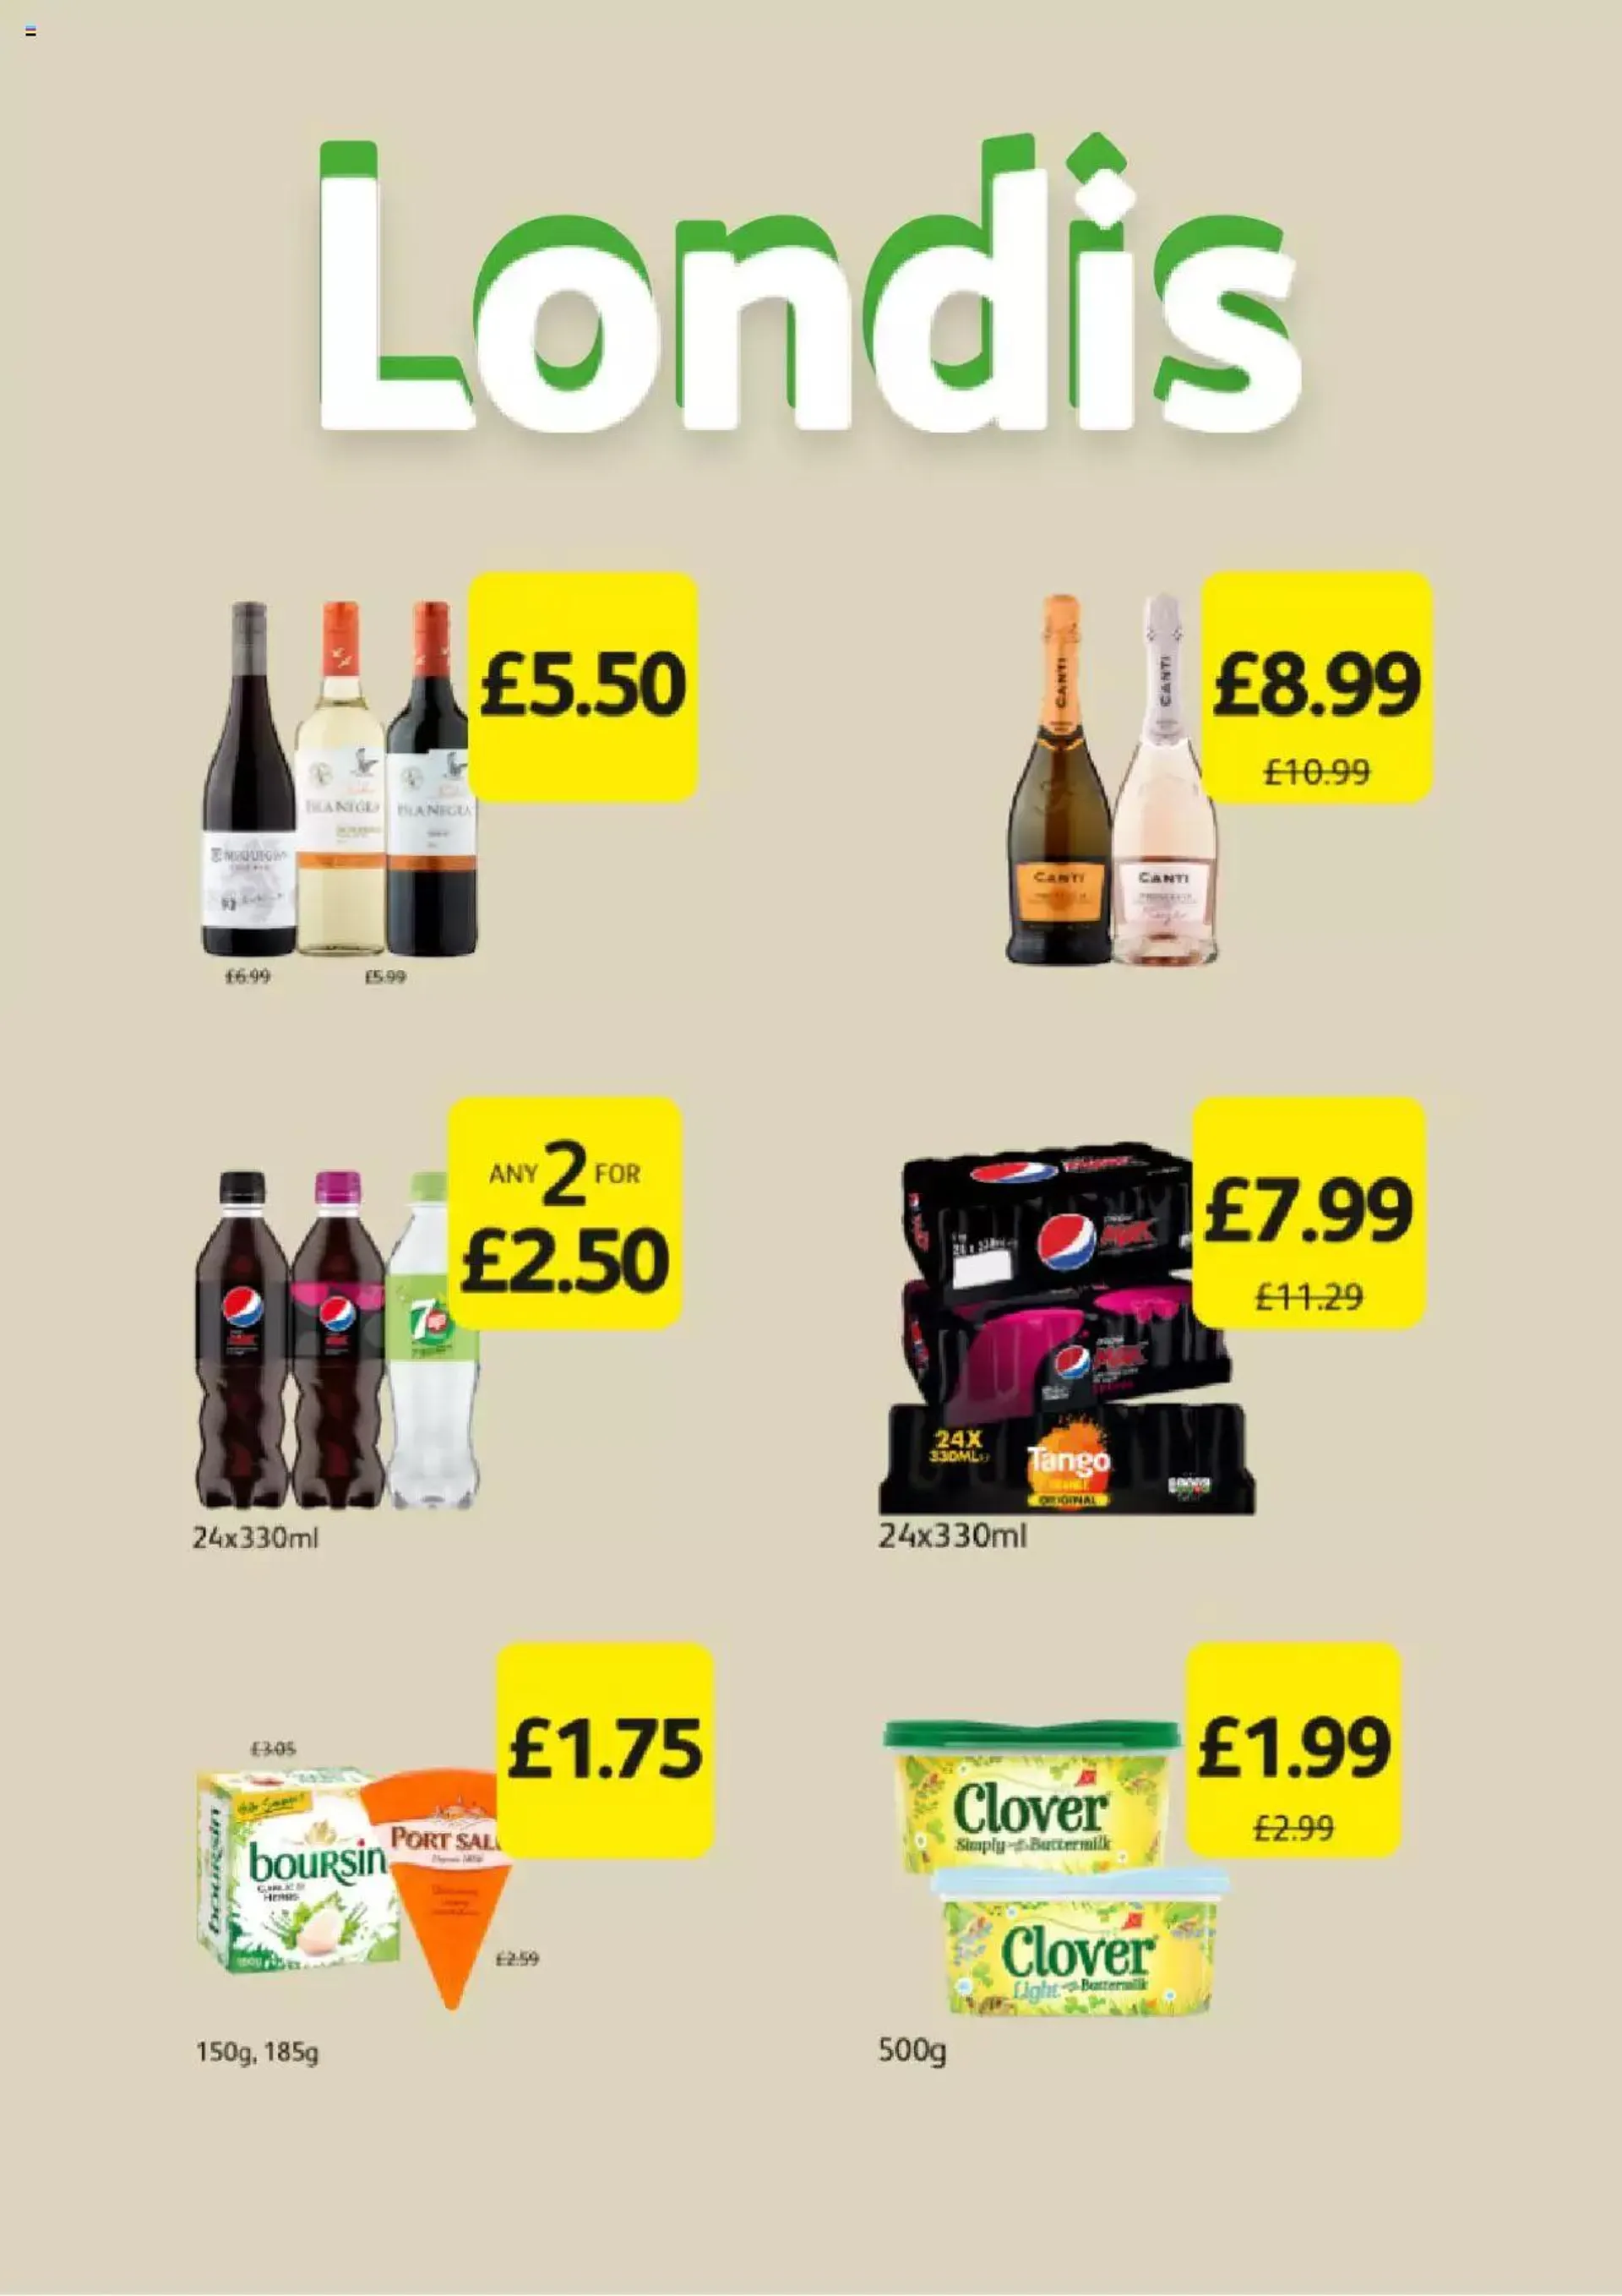 Londis - Christmas Offers - 7